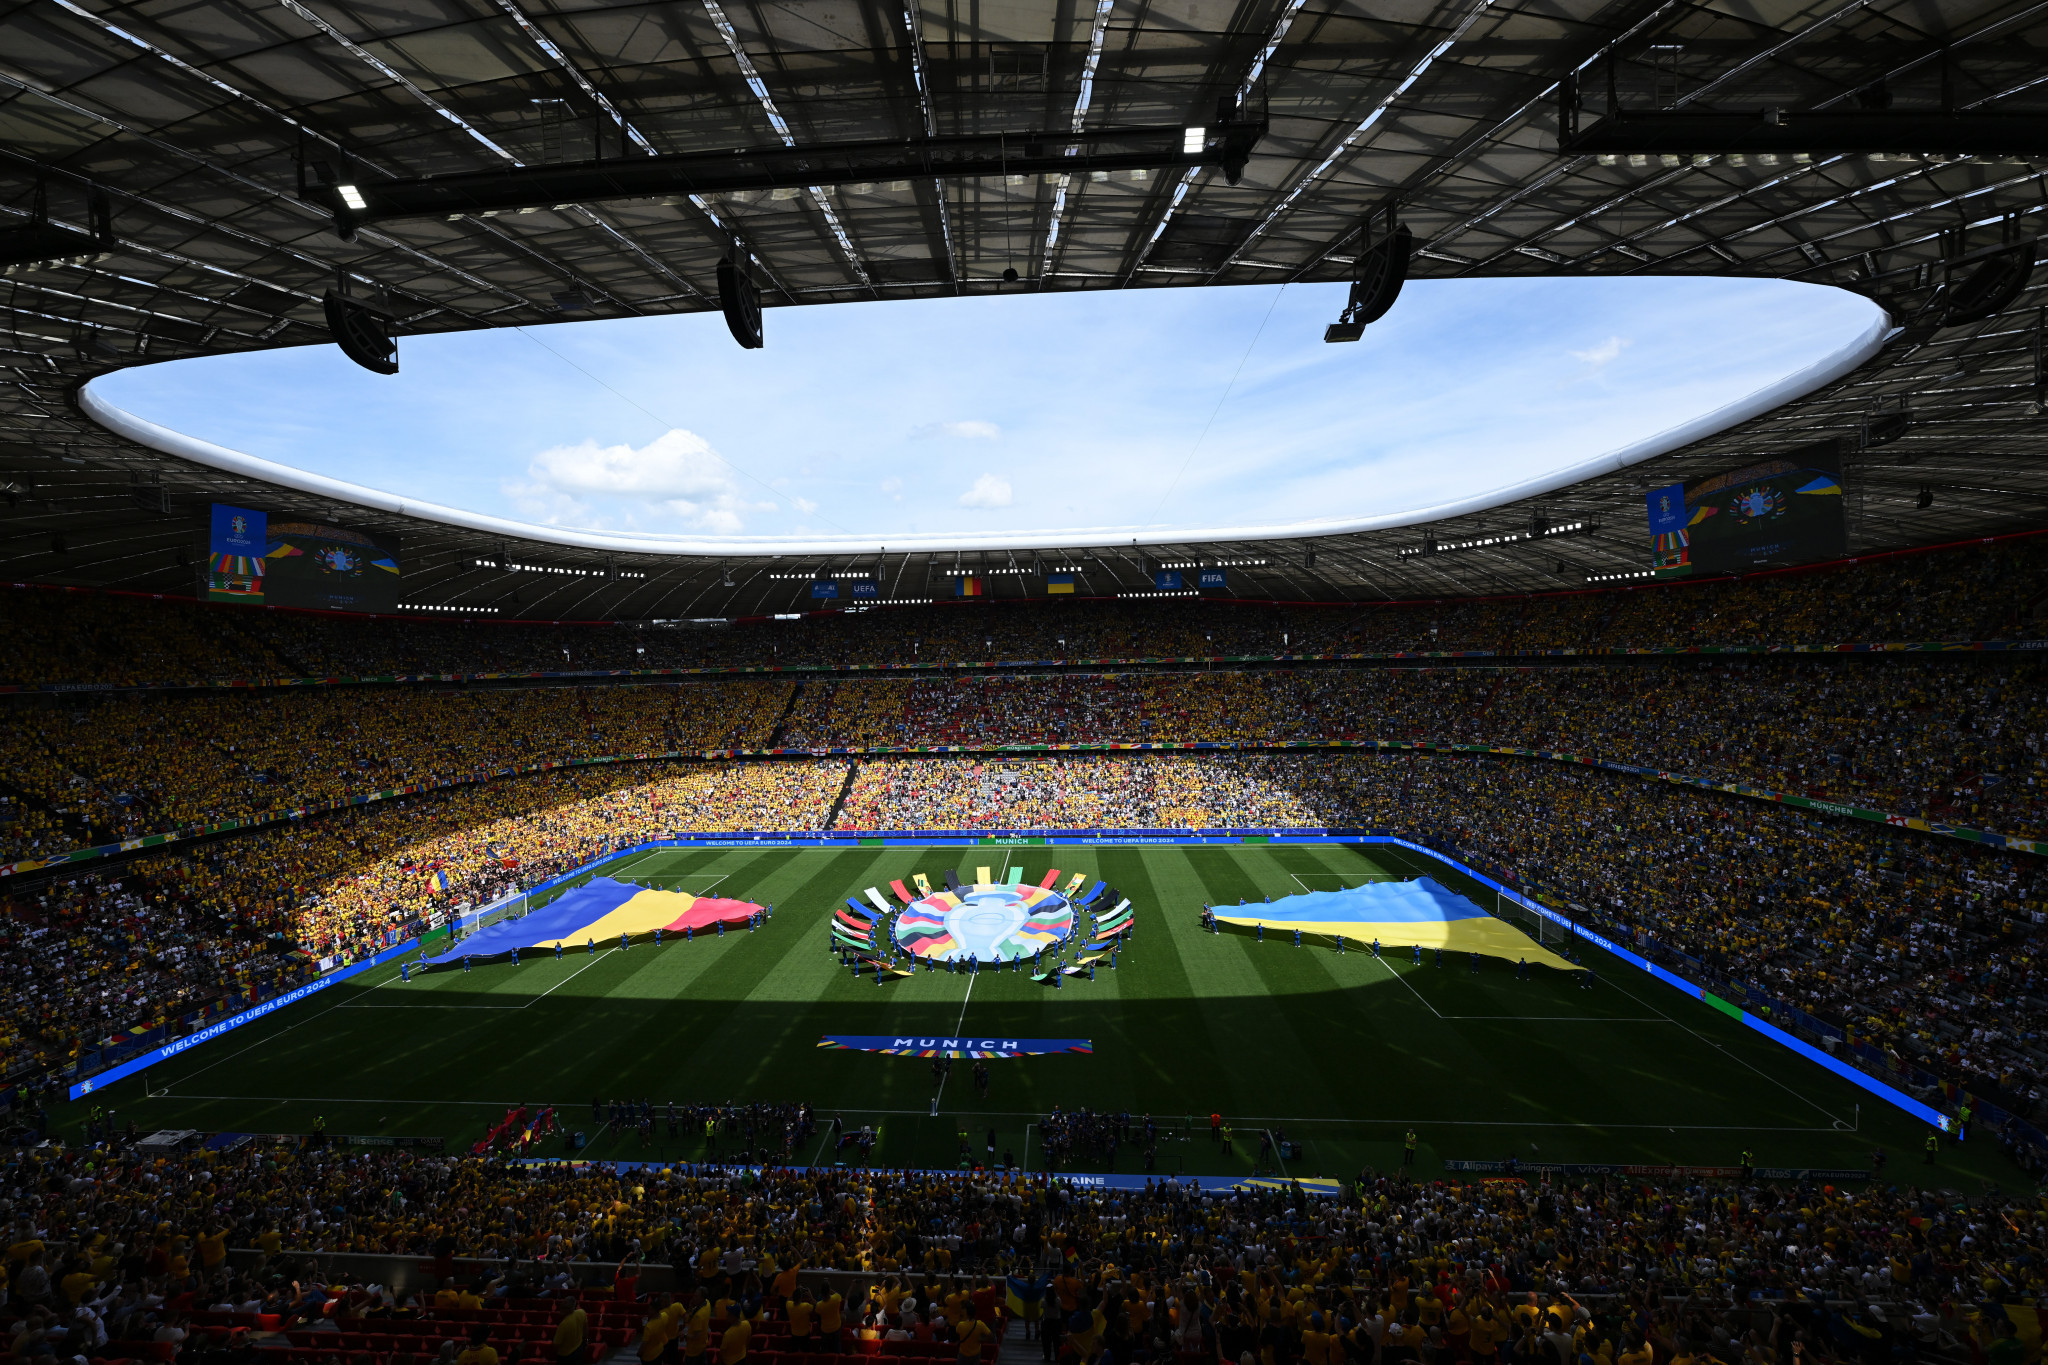 Euro 2024 in Germany is being hailed as the most sustainable tournament yet, according to Euromonitor. GETTY IMAGES